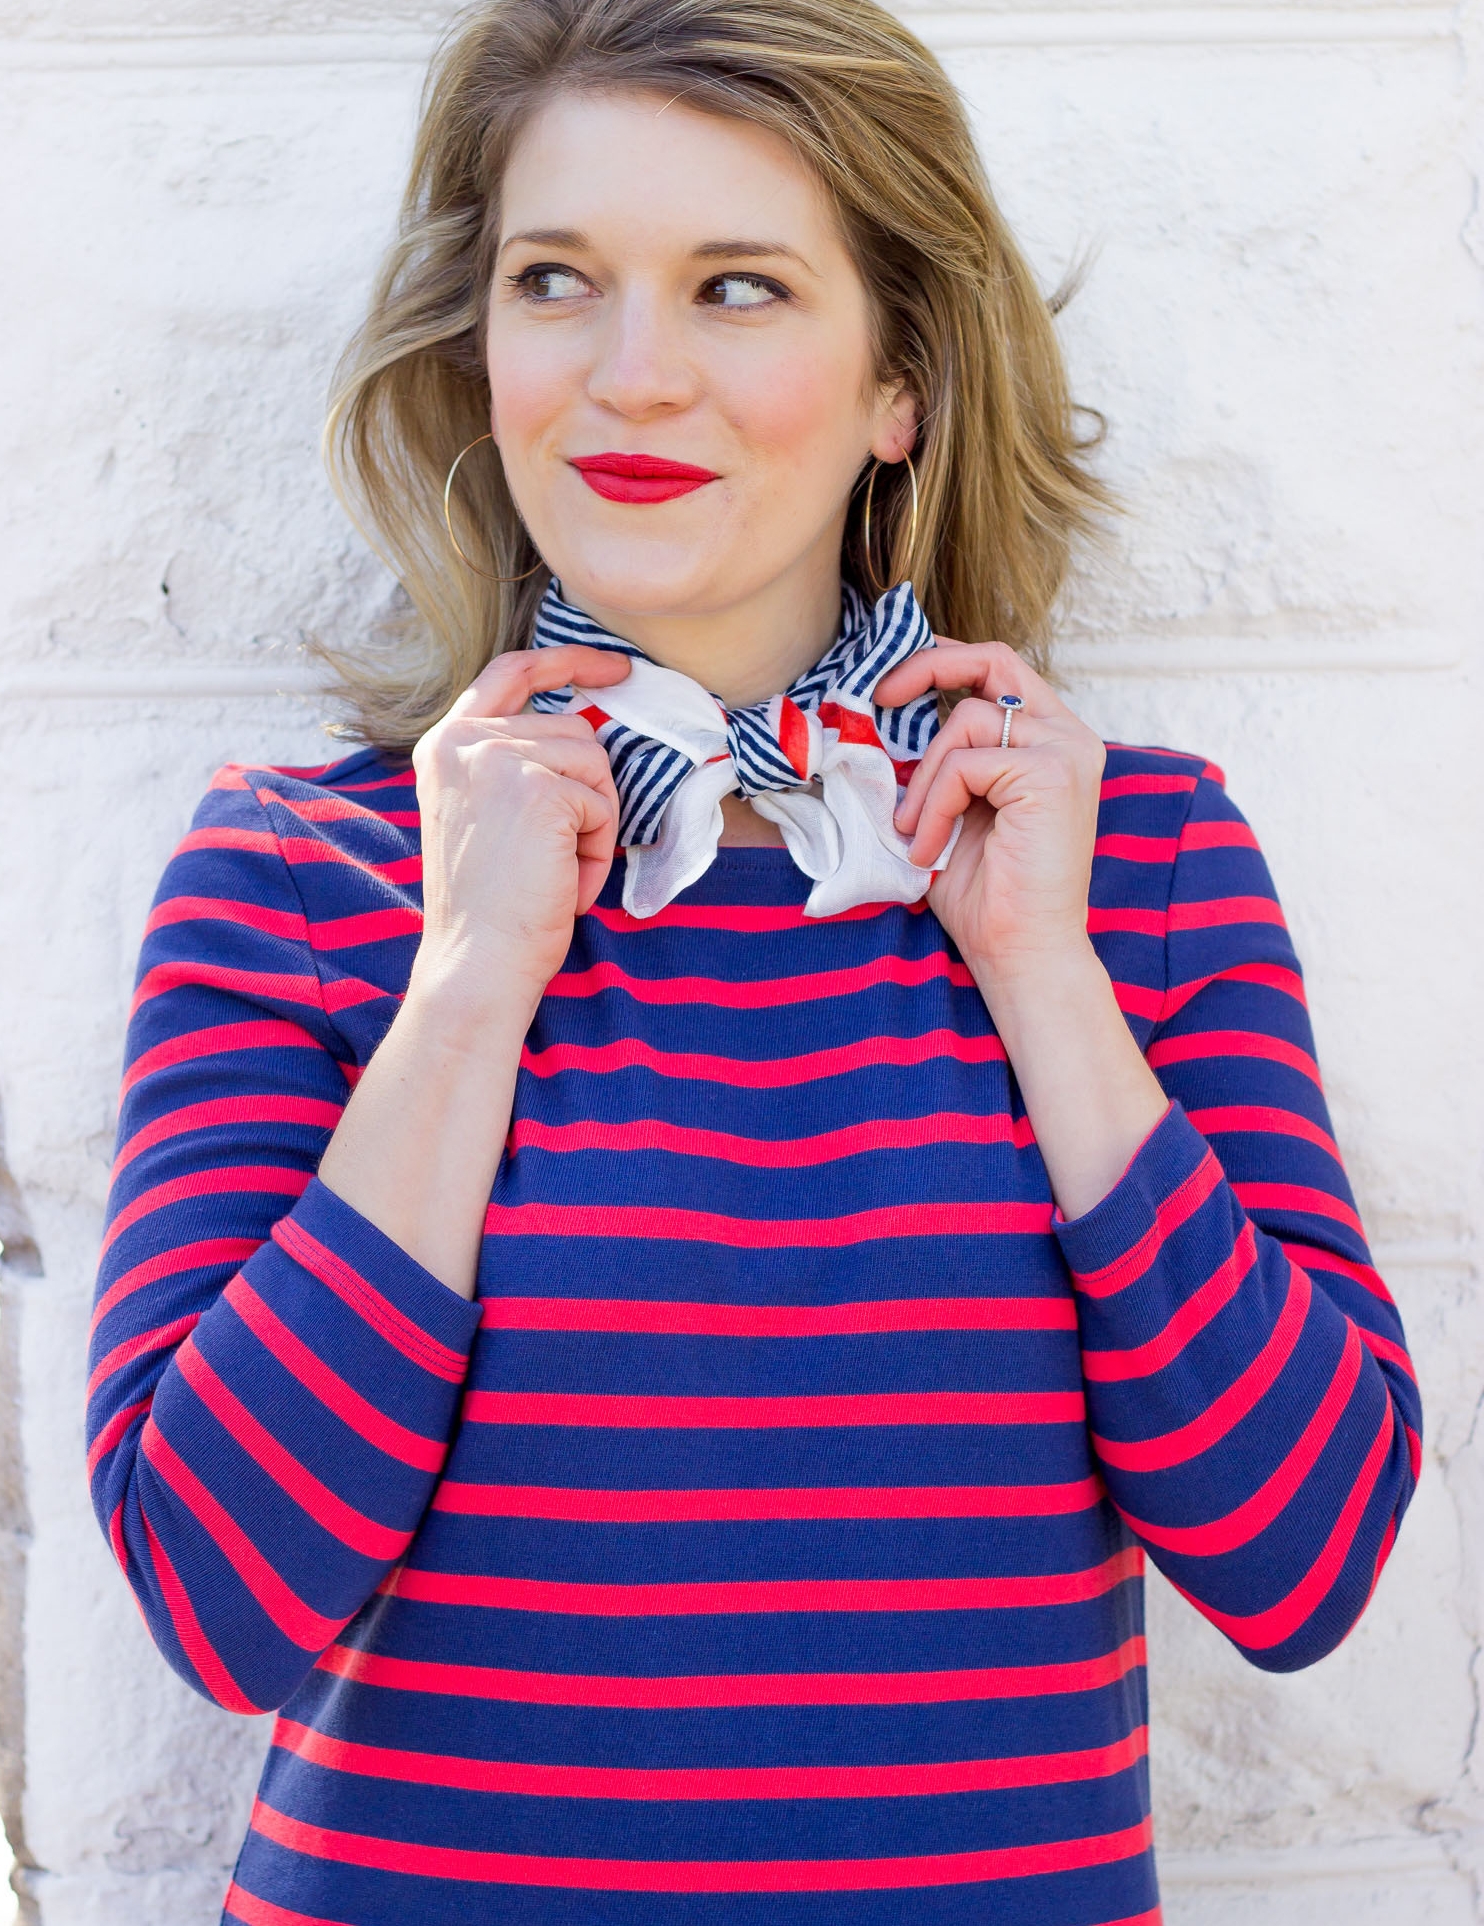 Old Navy striped dress worn by Elise Giannasi of Belle Meets World blog